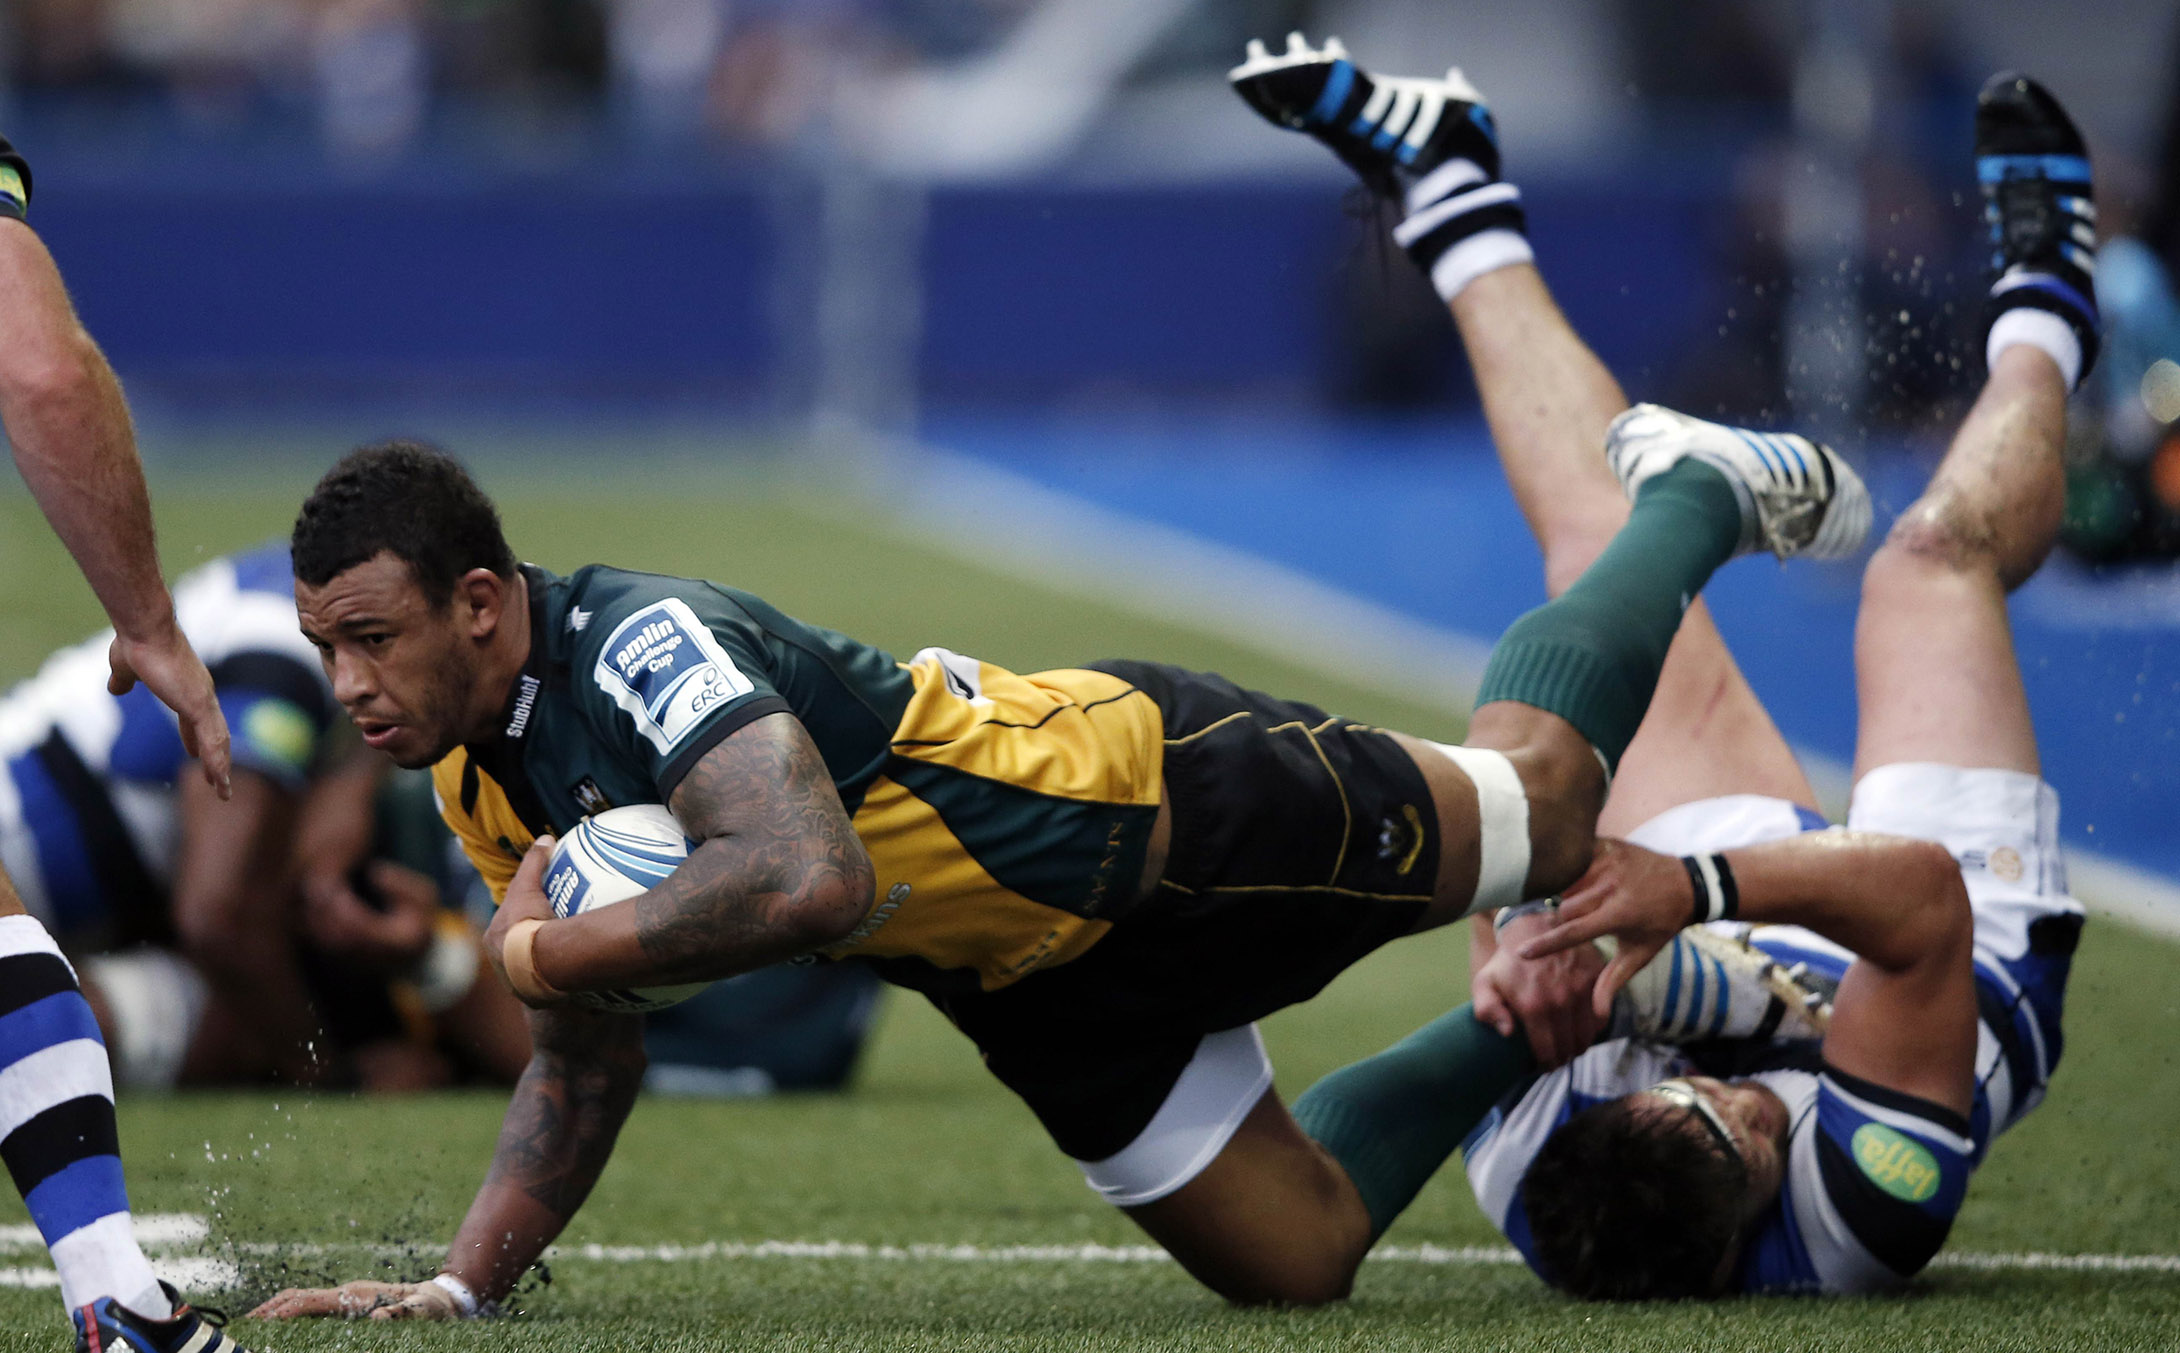 Northhampton lock Courtney Lawes is tackled by Bath hooker Tom Dunn during last week’s European Challenge Cup final. On Saturday, Saints became English champions for the first time when they beat Saracens 24-20 at Twickenham. Photo: AFP